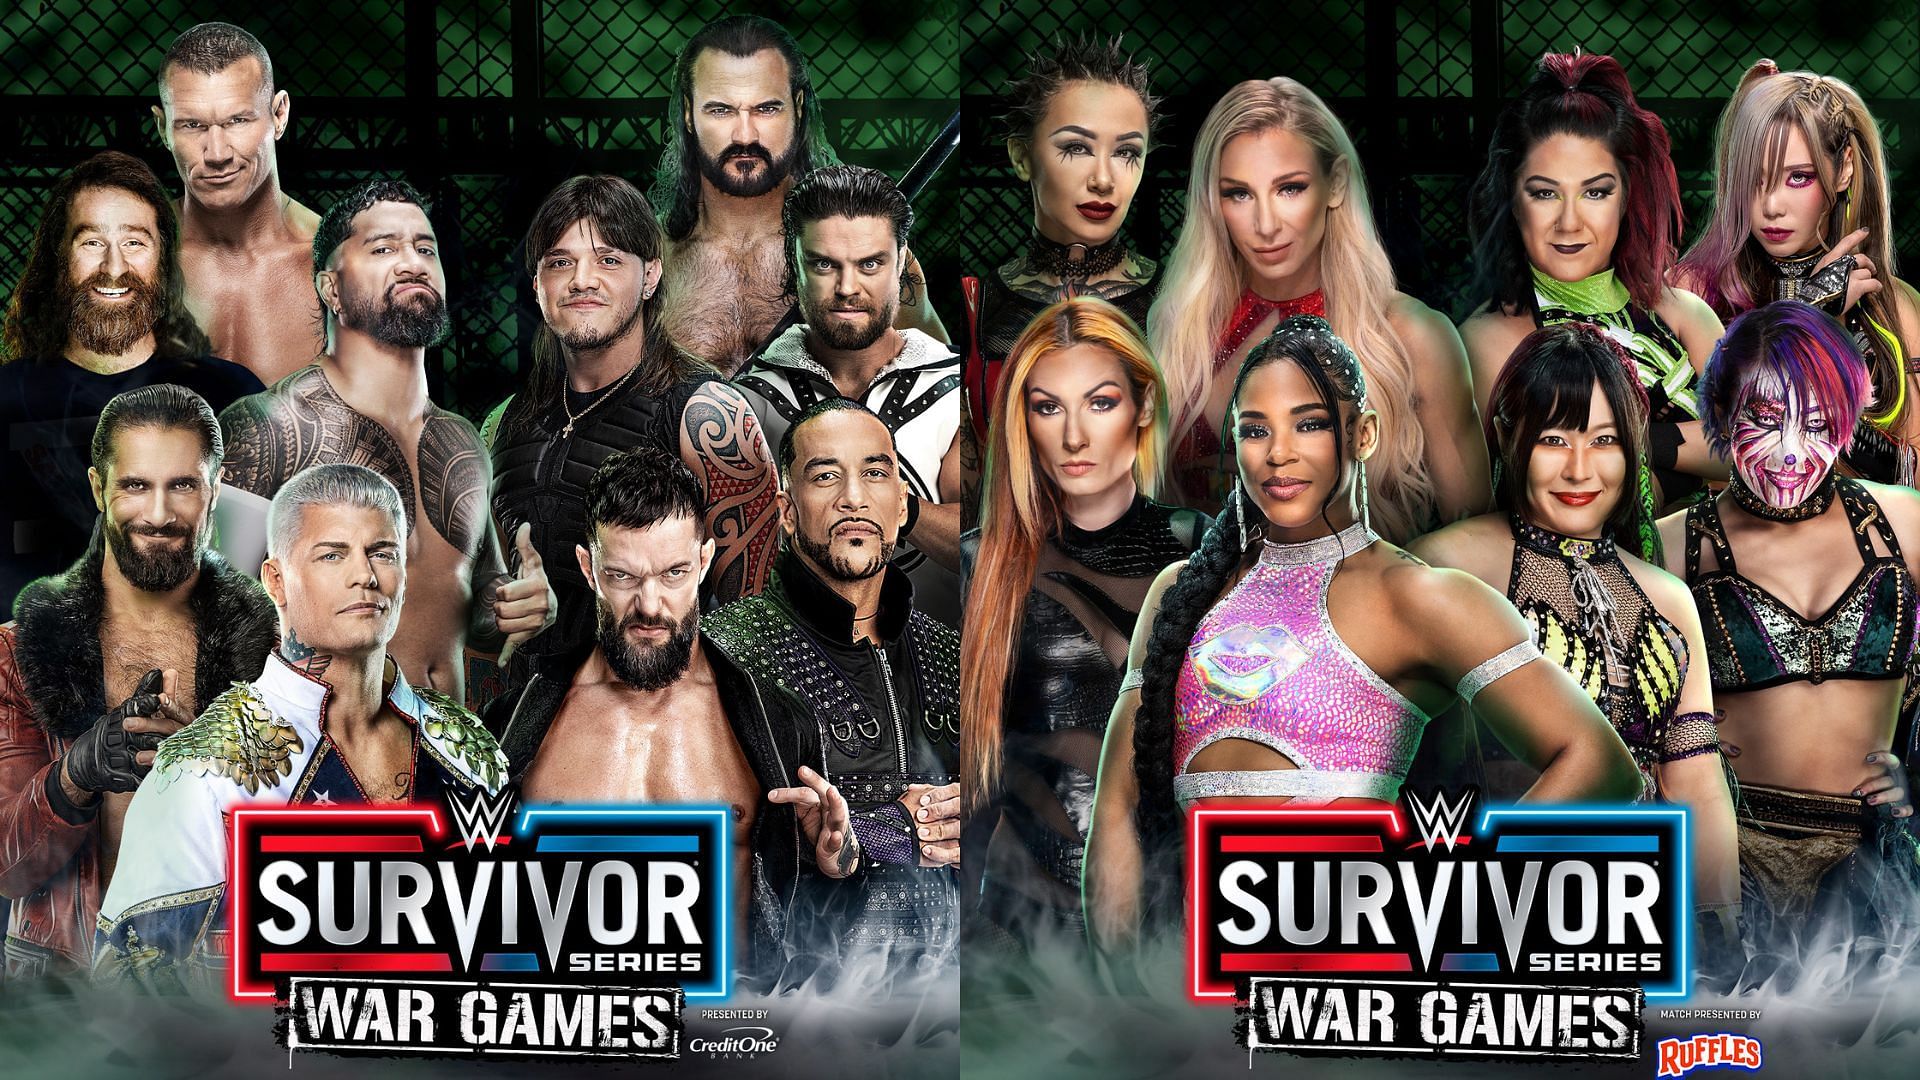 Major star is expected to turn on their teammate at WWE Survivor Series